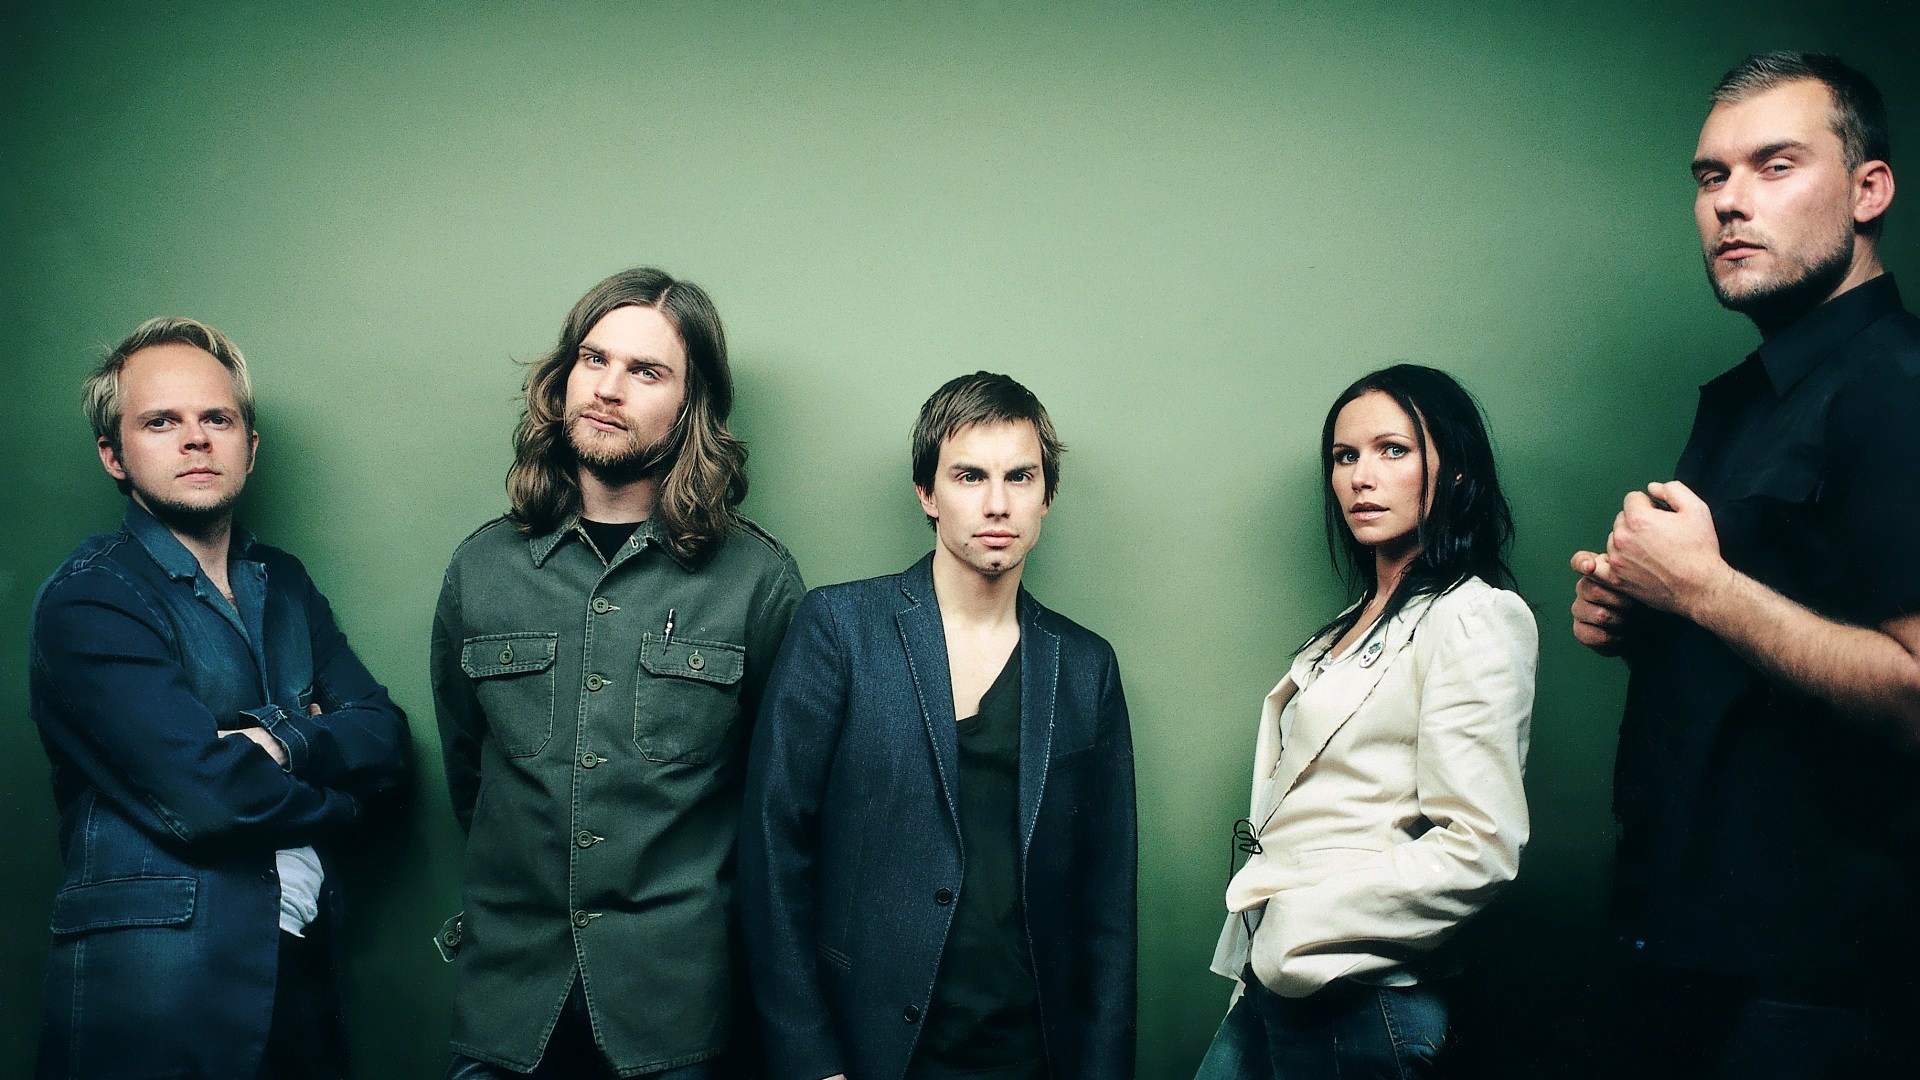 The Cardigans HD wallpapers, Latest music downloads, Artistic band images, FanartTV, 1920x1080 Full HD Desktop